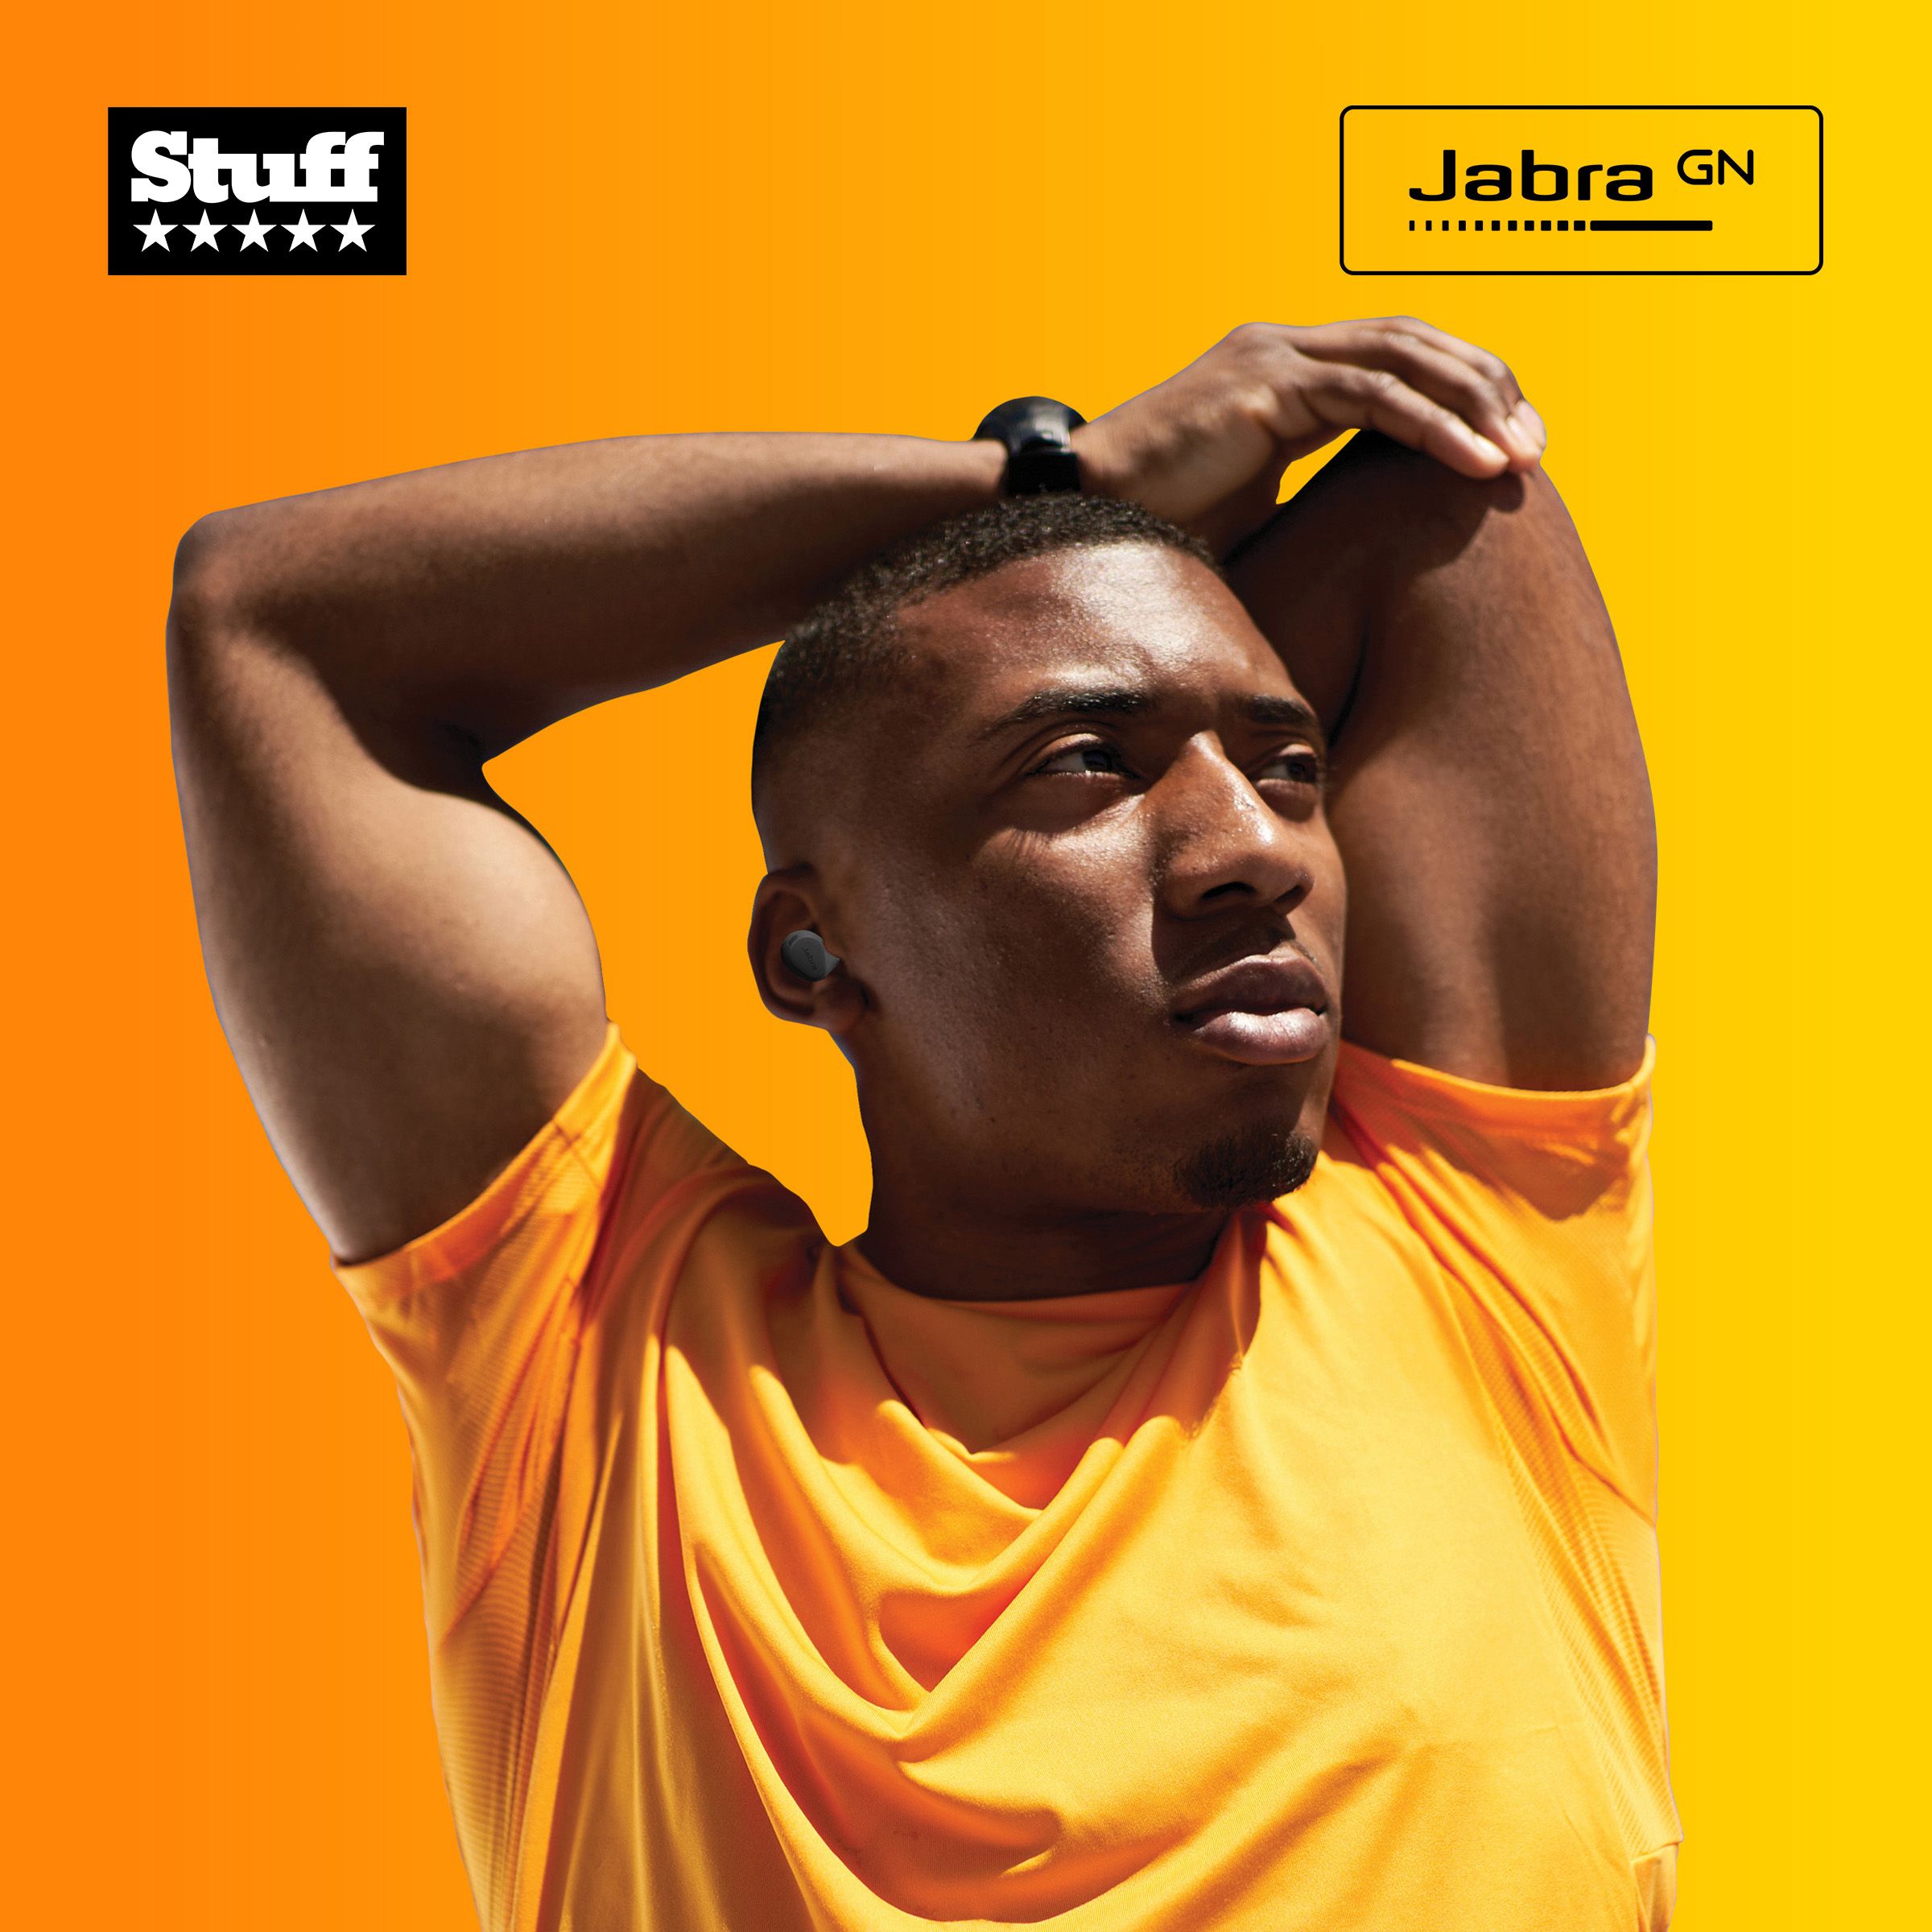 Man in yellow t-shirt with Jabra earbuds